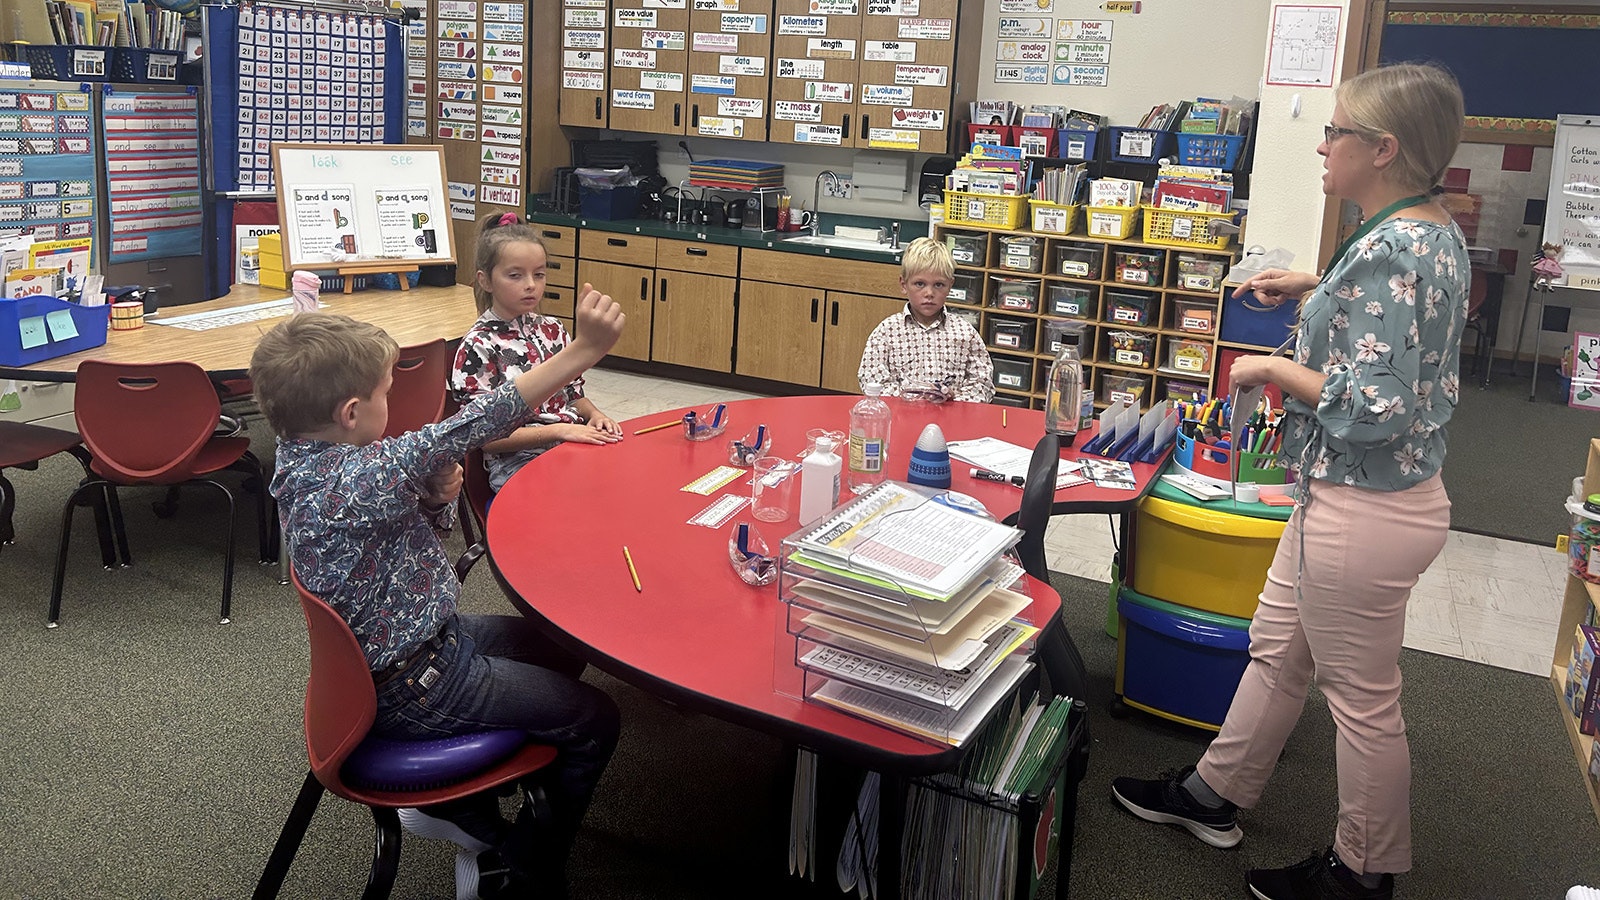 Teacher Karin Unruh gives classroom instruction at Bondurant Elementary. Pictured from left are students Brady Saunders, Tynlee Smith and Jack Tolson.